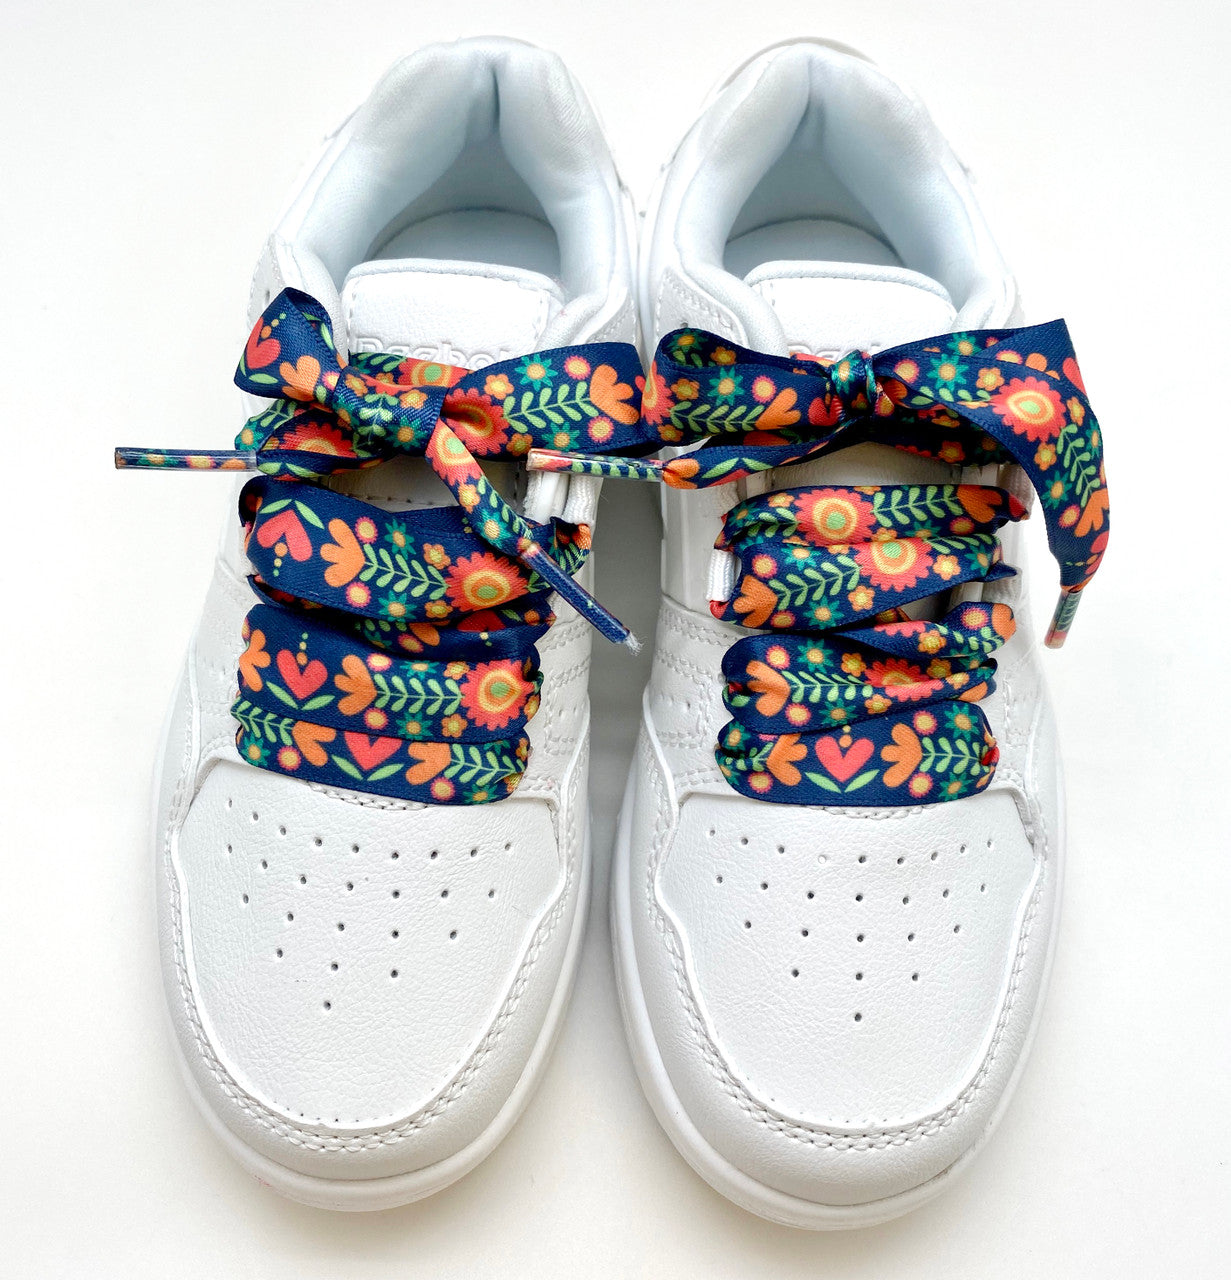 Satin shoelaces boho floral design is perfect for adding some fun and fashion to your sneakers! This is a great shoelace for fun dance shoes, wedding shoes, cheerleading and recitals! All our ribbon shoelaces are printed using dye sublimation technology and can be washed, ironed and re-used! All our laces are designed and printed in the USA